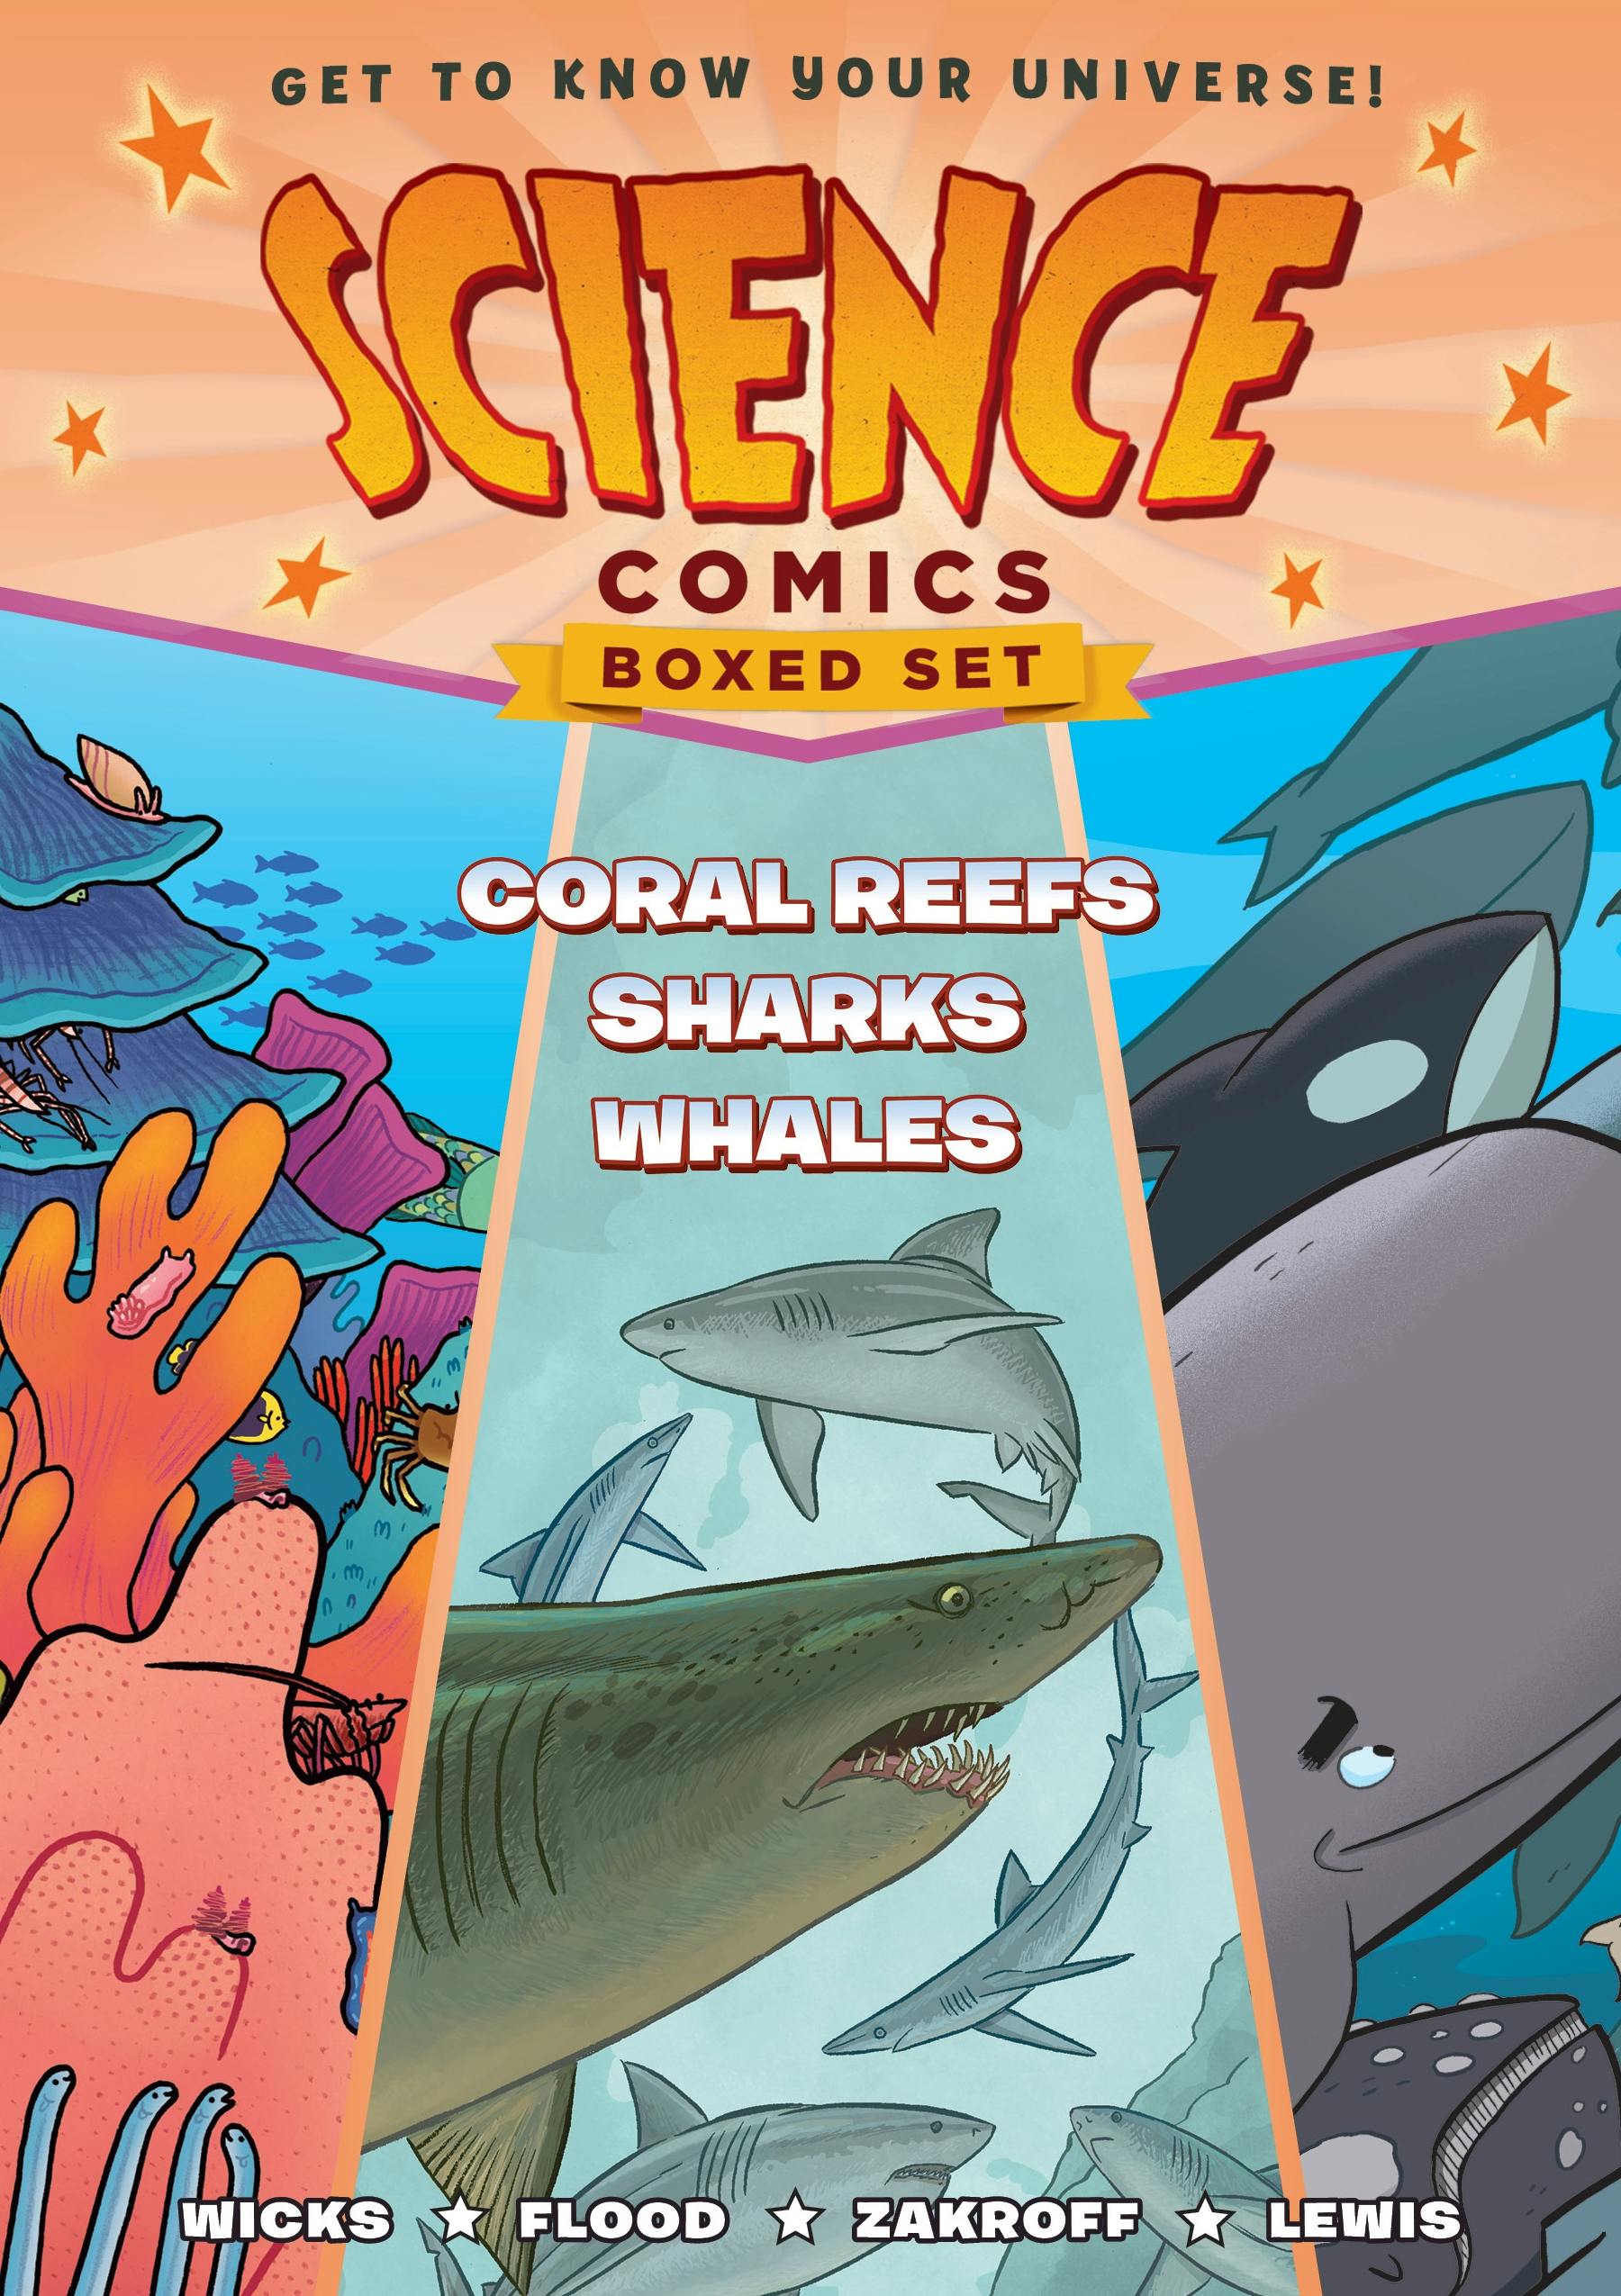 Image of Science Comics Boxed Set: Coral Reefs, Sharks, and Whales